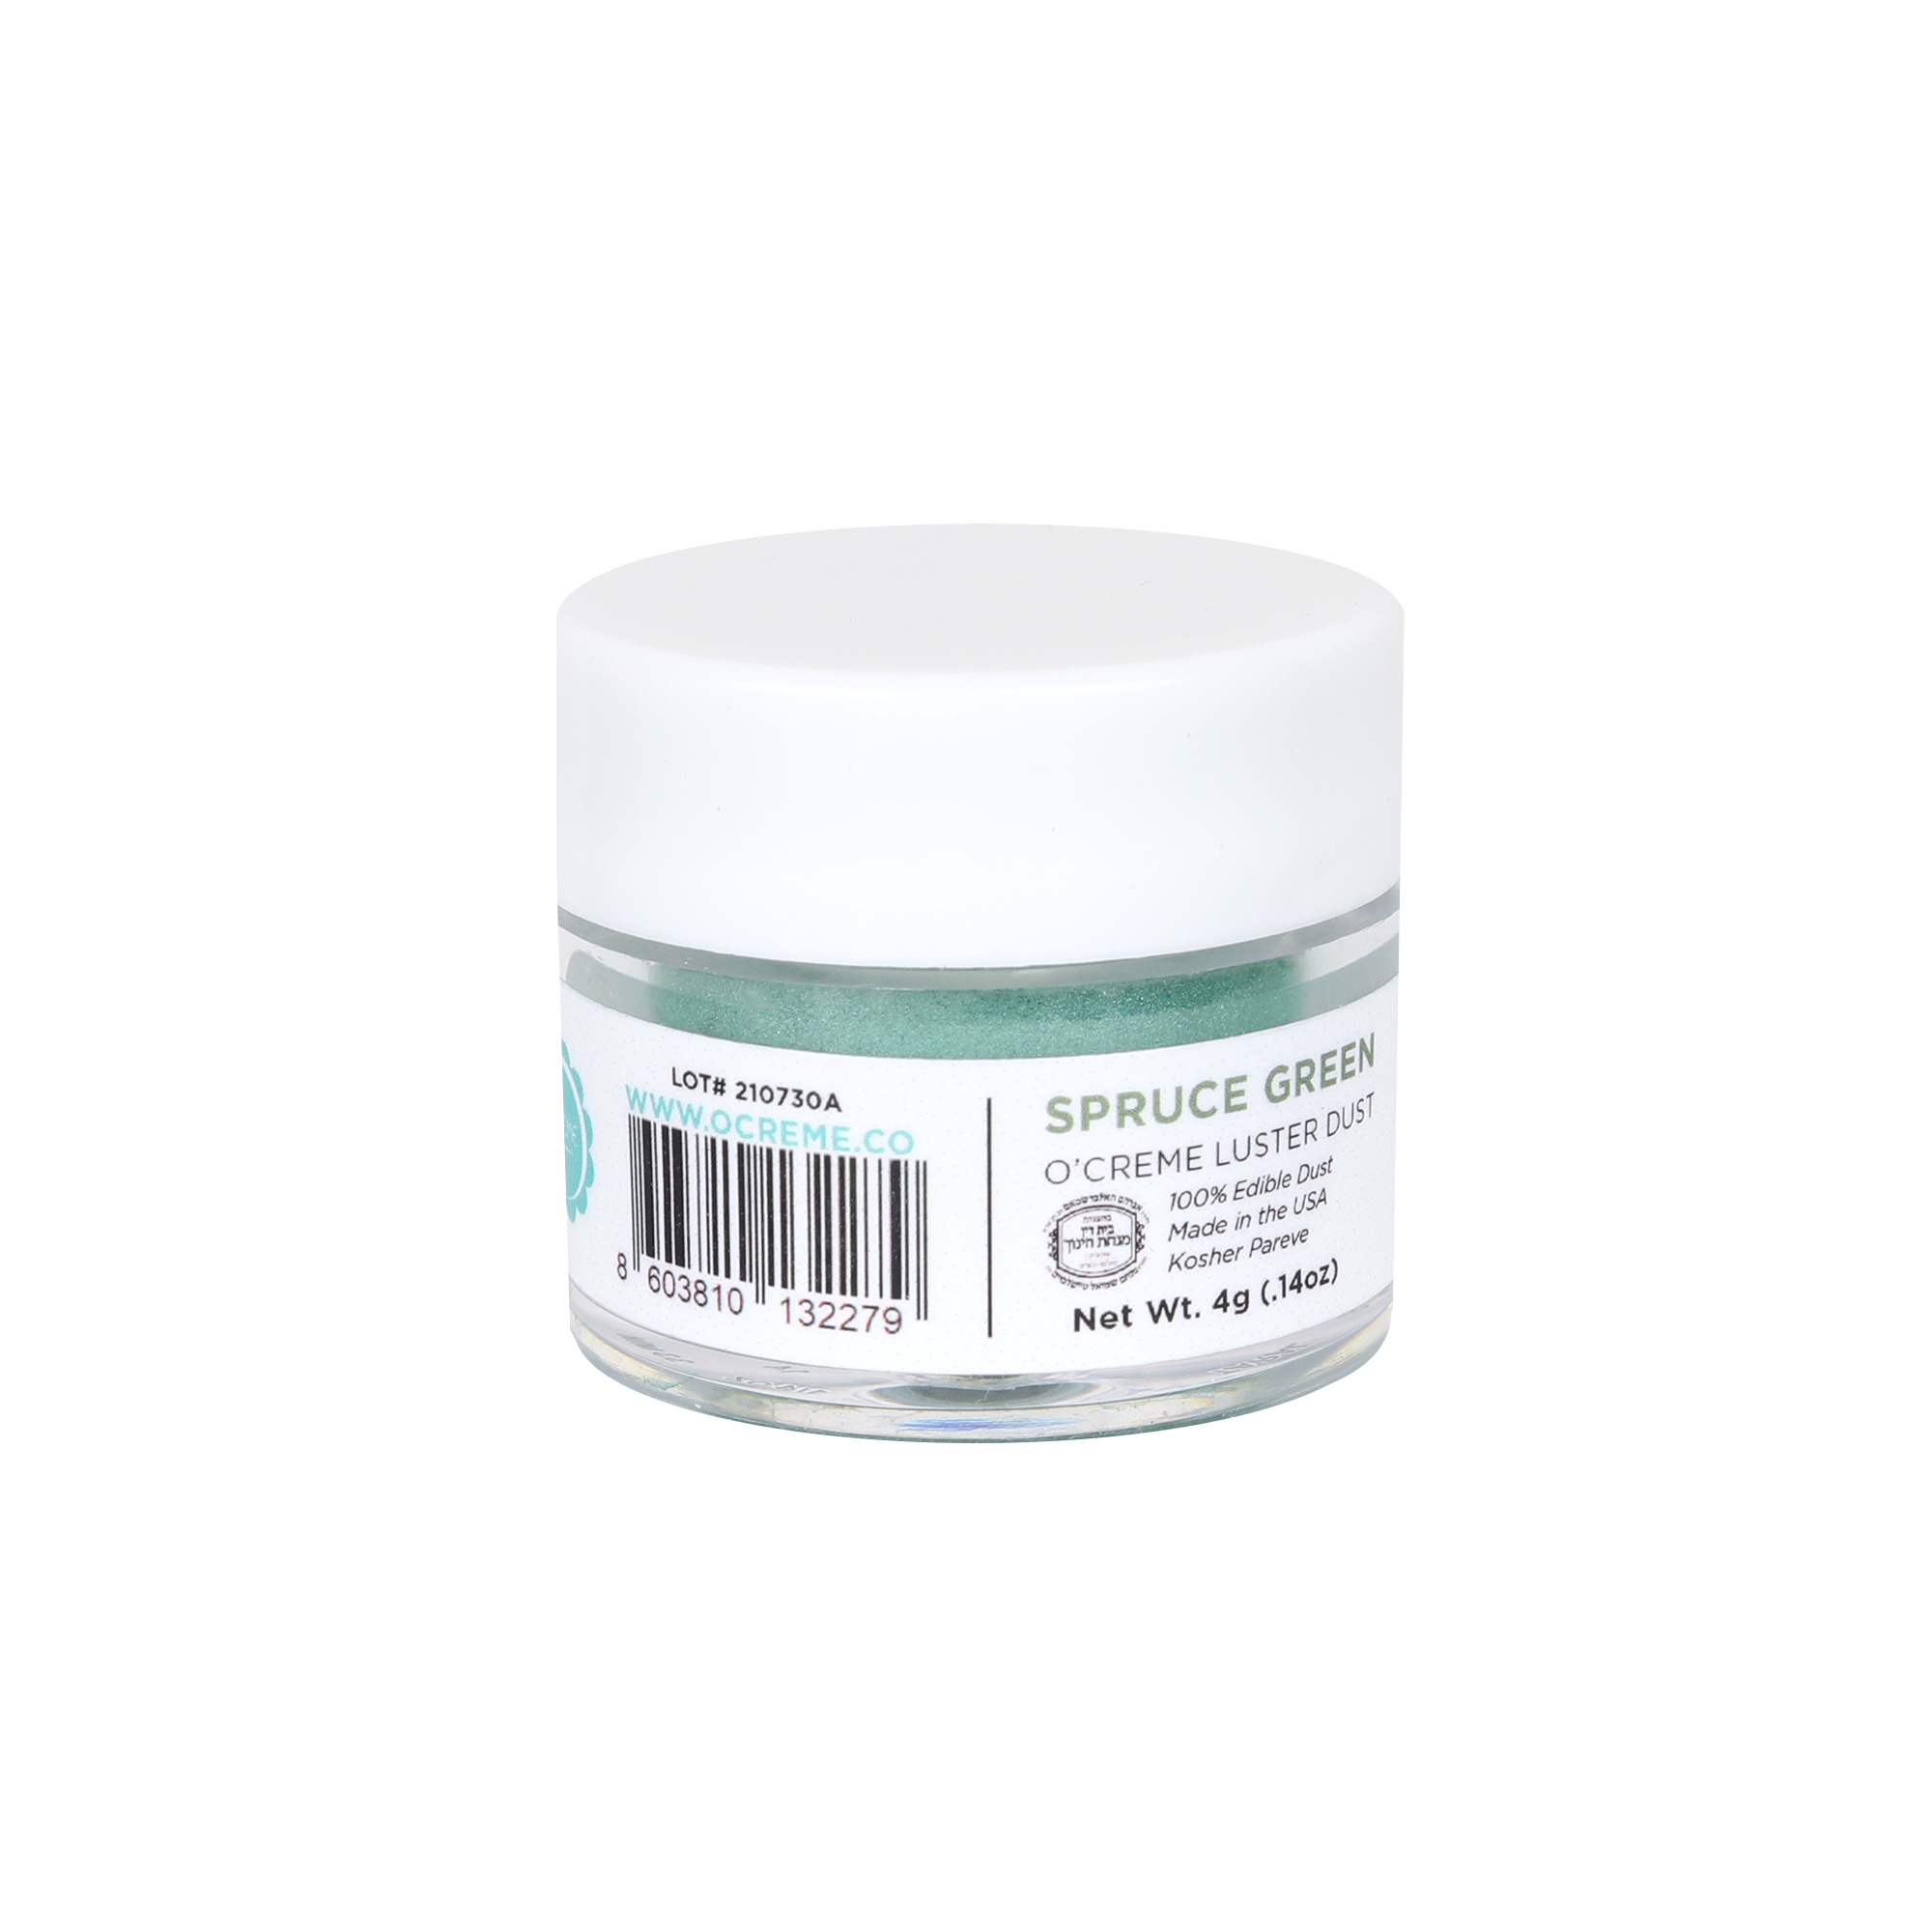 O'Creme Spruce Green Luster Dust, 4 gr. image 1